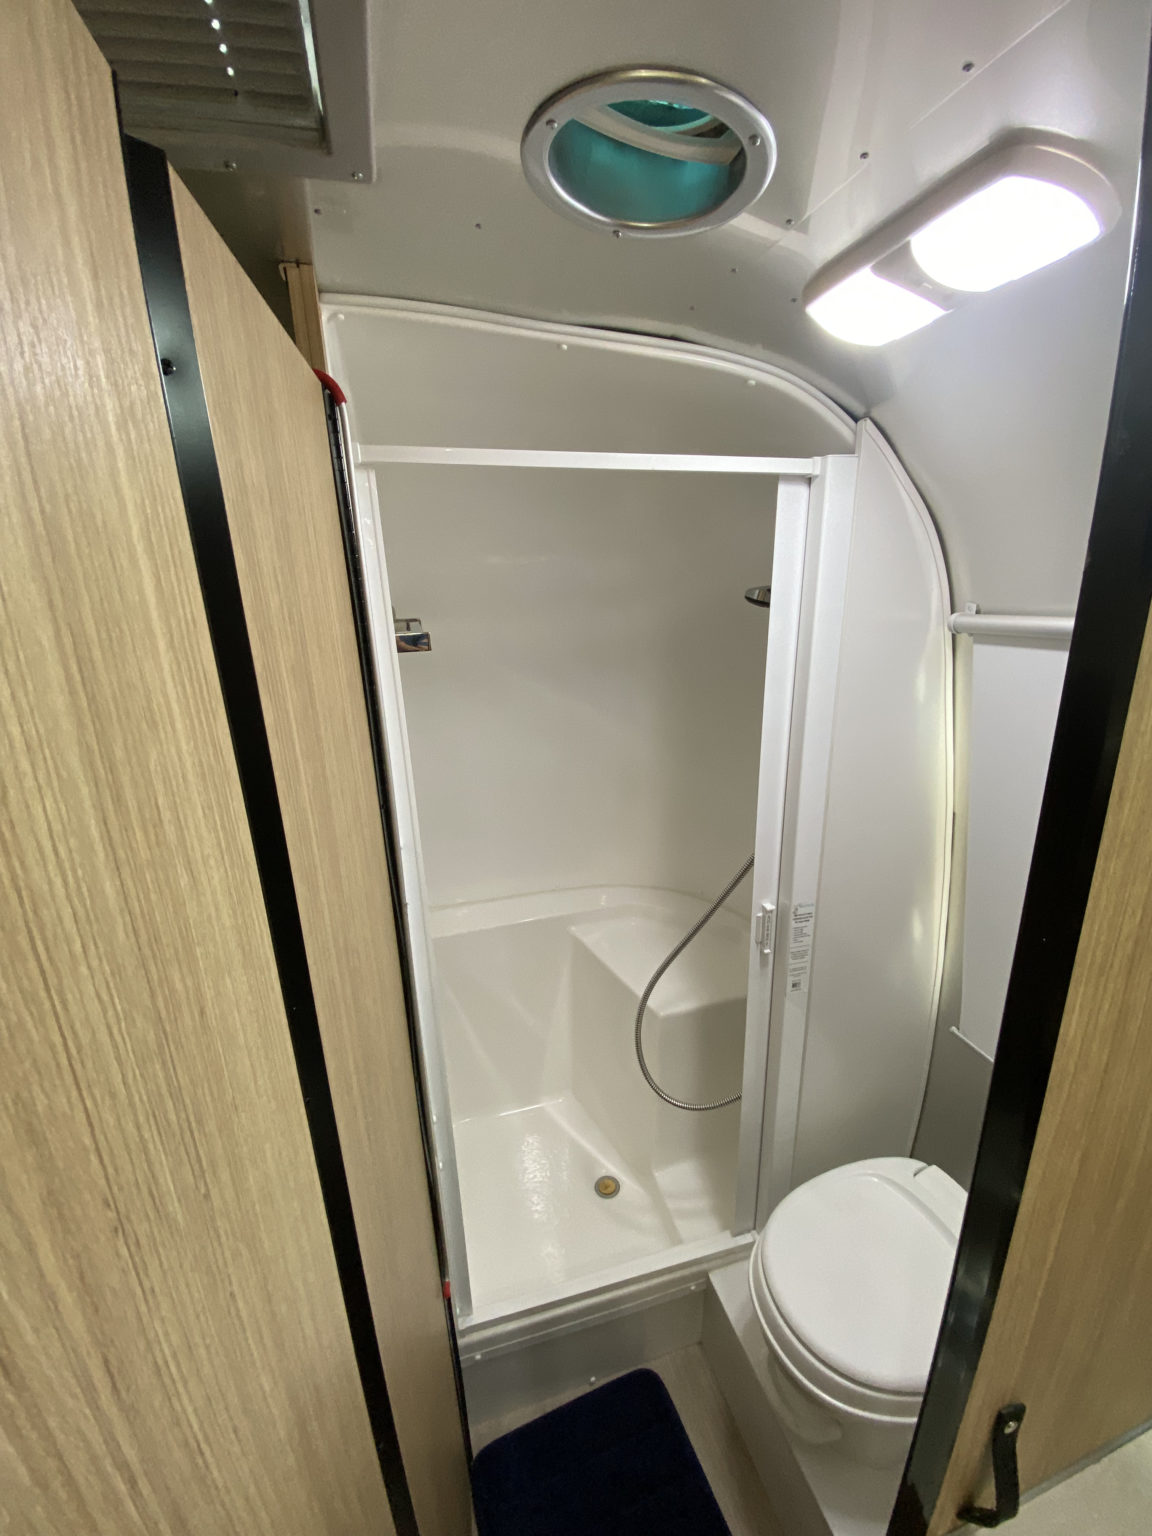 2019 Airstream 23FT Flying Cloud For Sale in DENVER - Airstream Marketplace